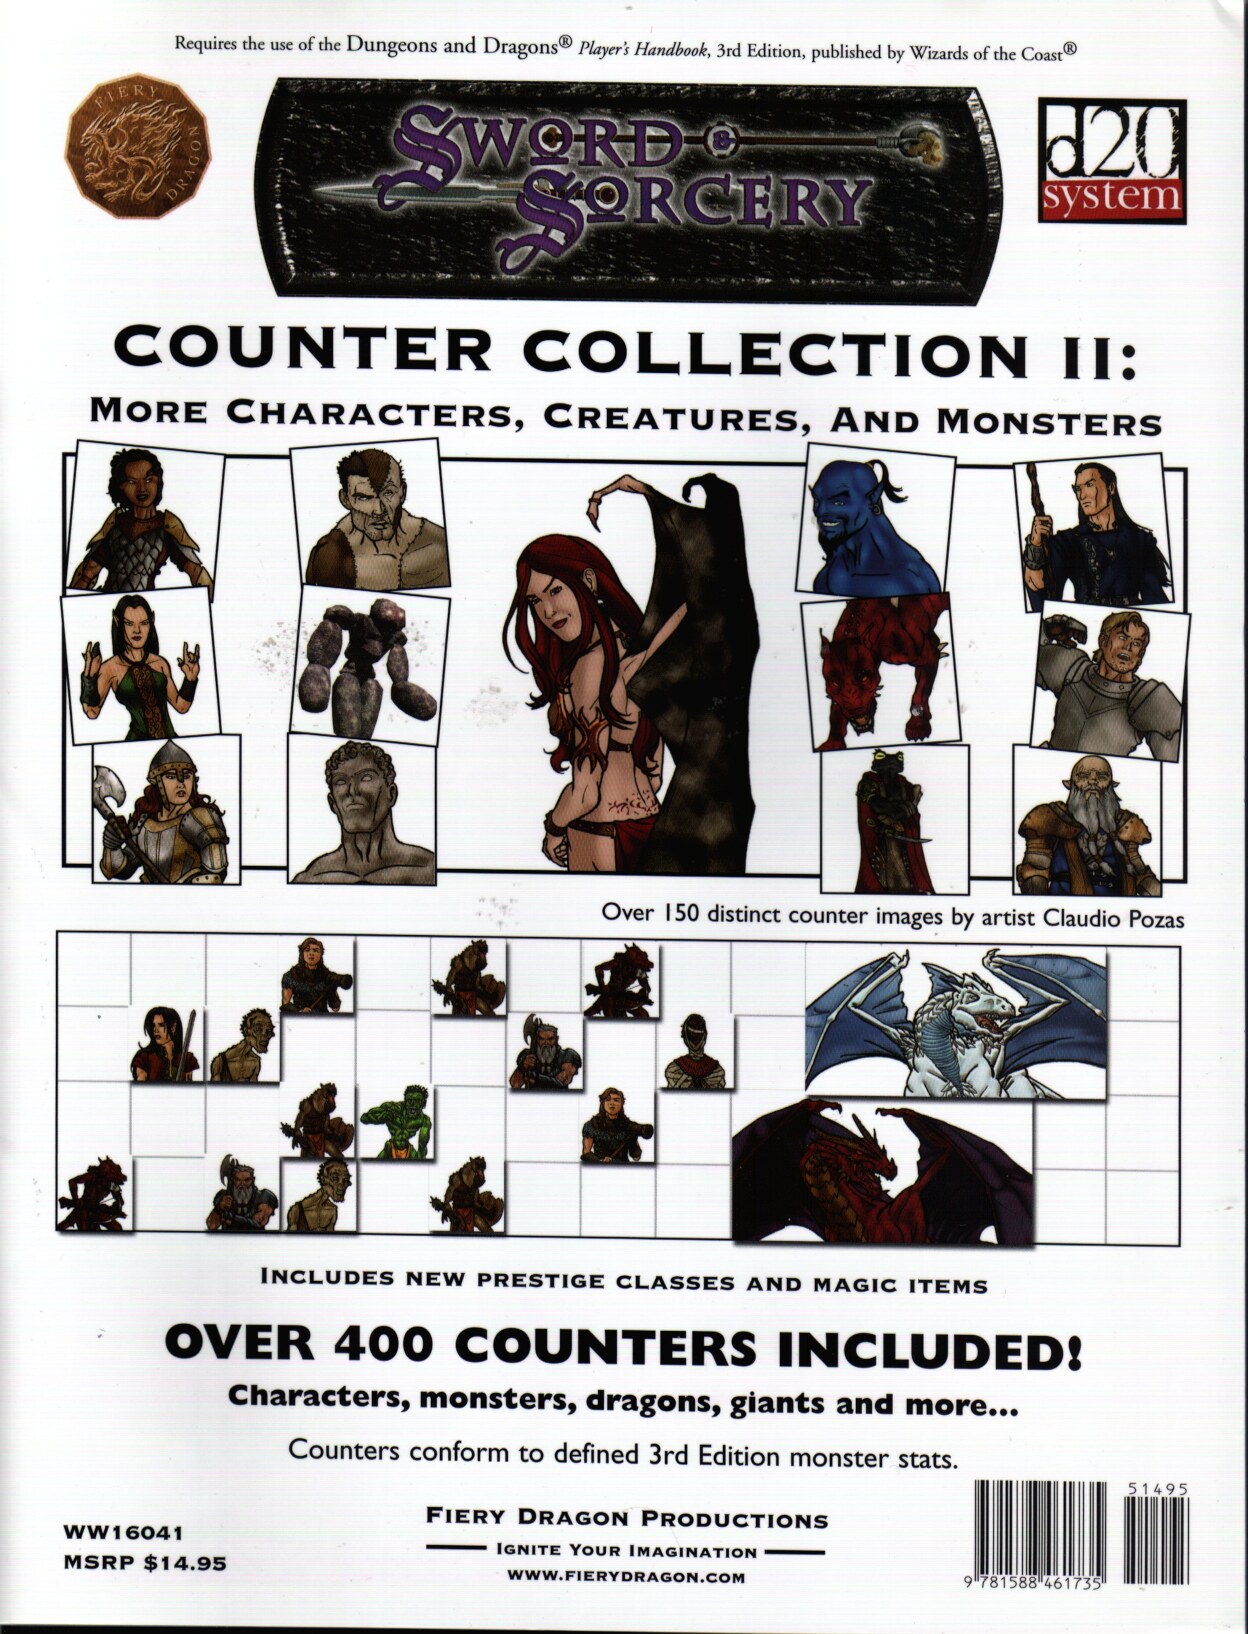 WW16041 Counter Collection II